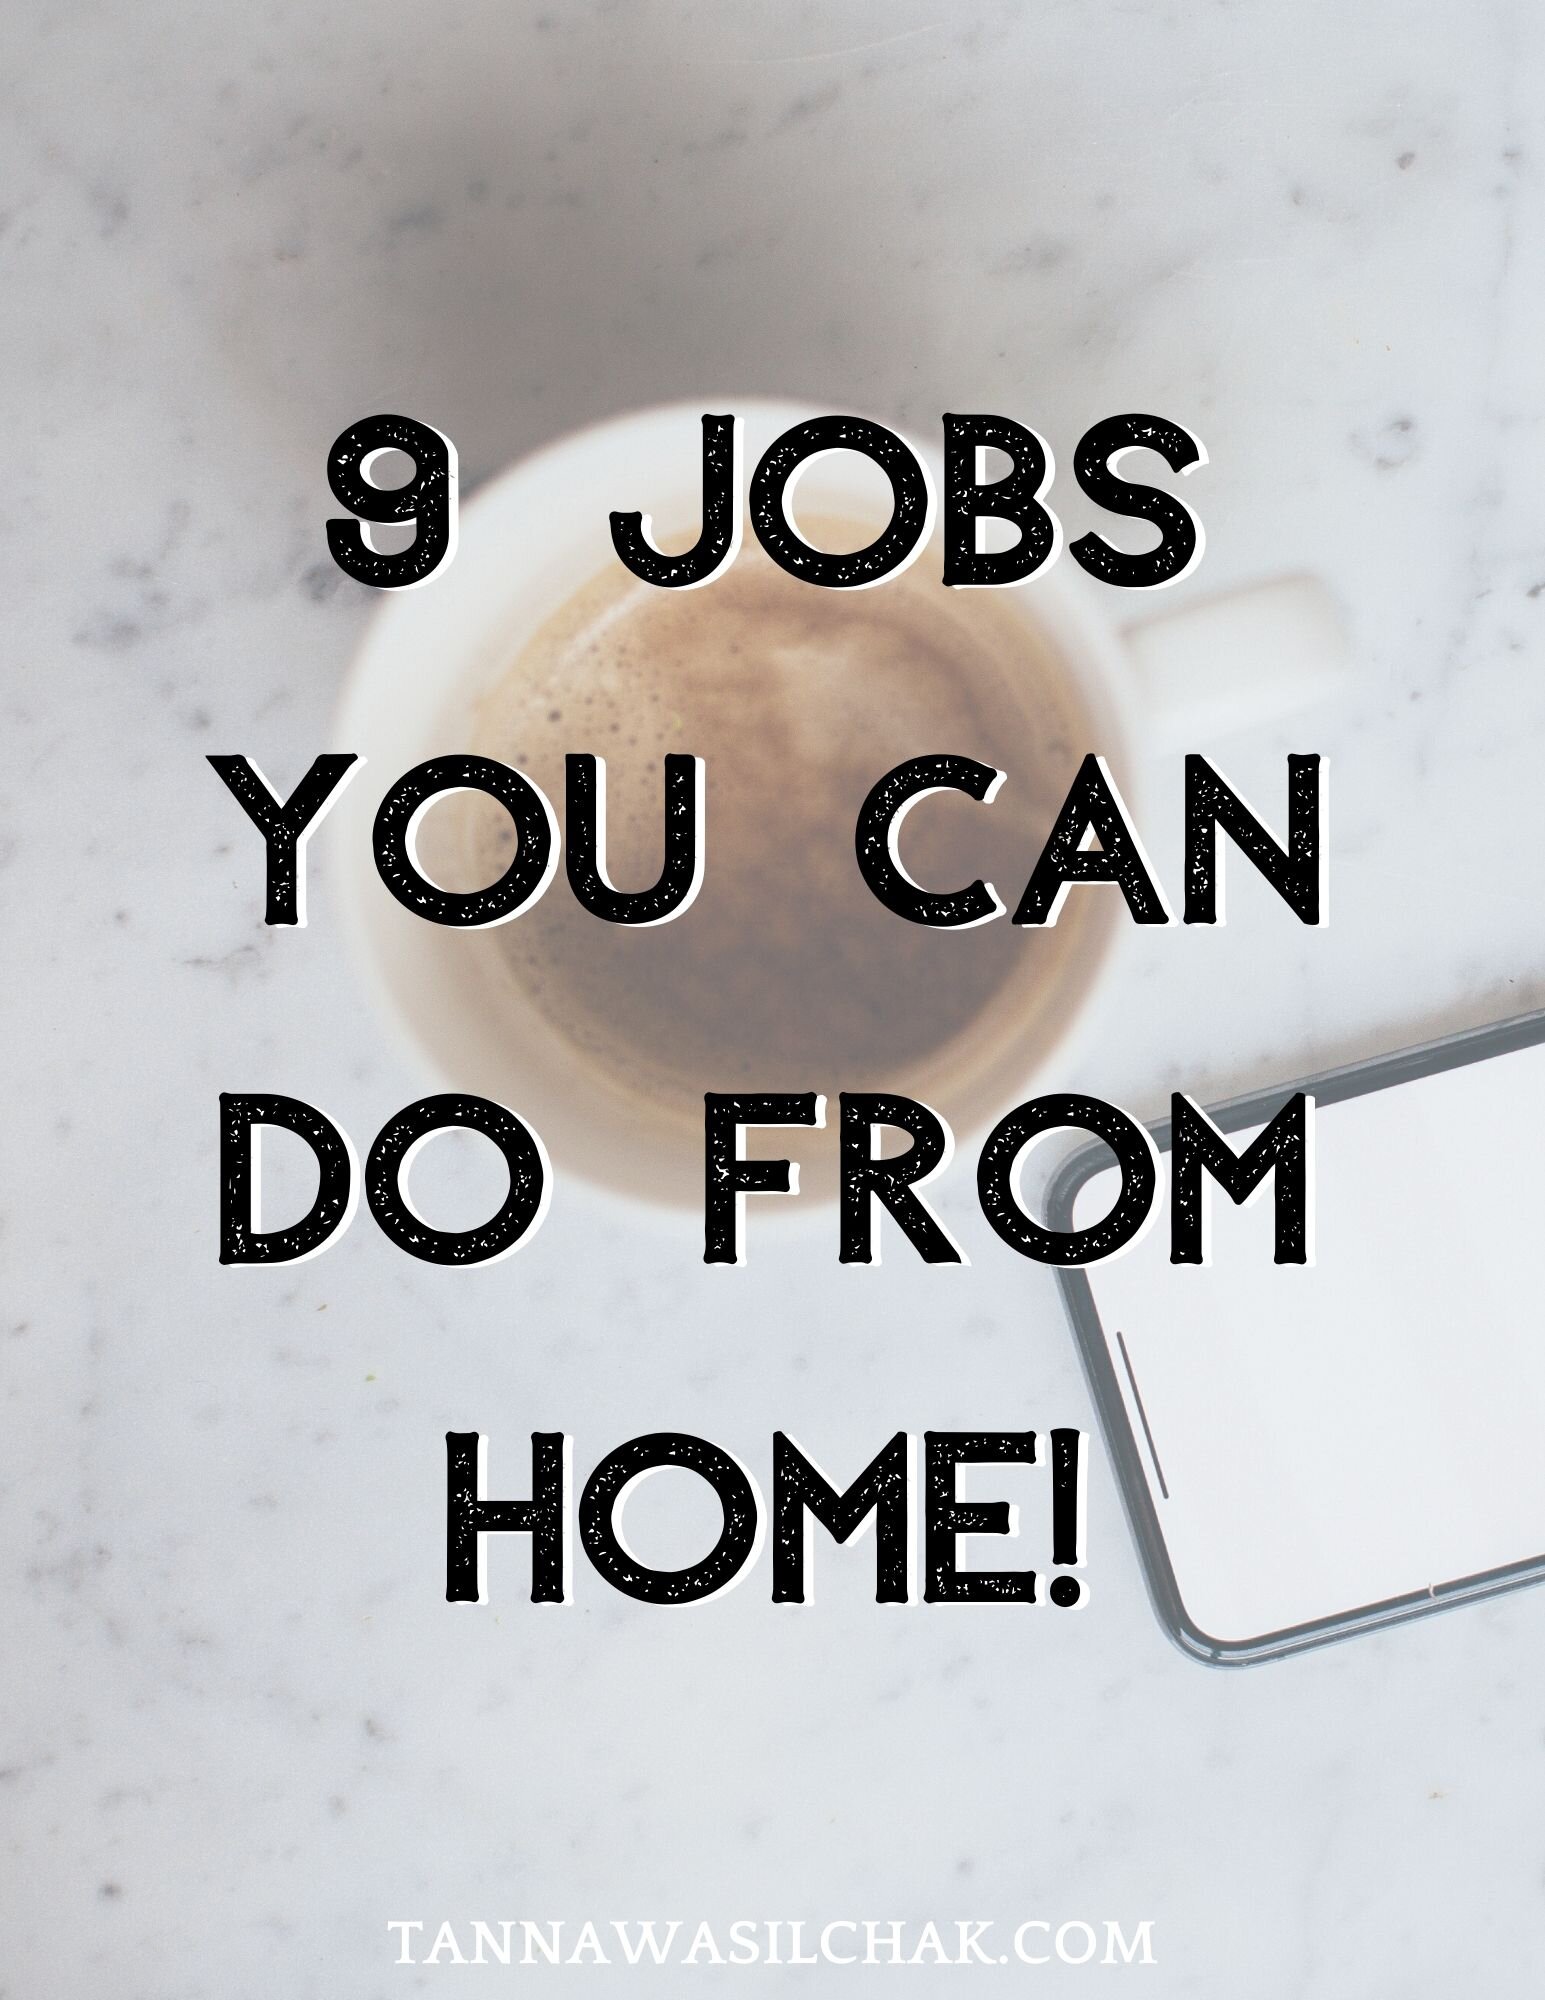 9 JOBS YOU CAN DO FROM HOME!.jpg